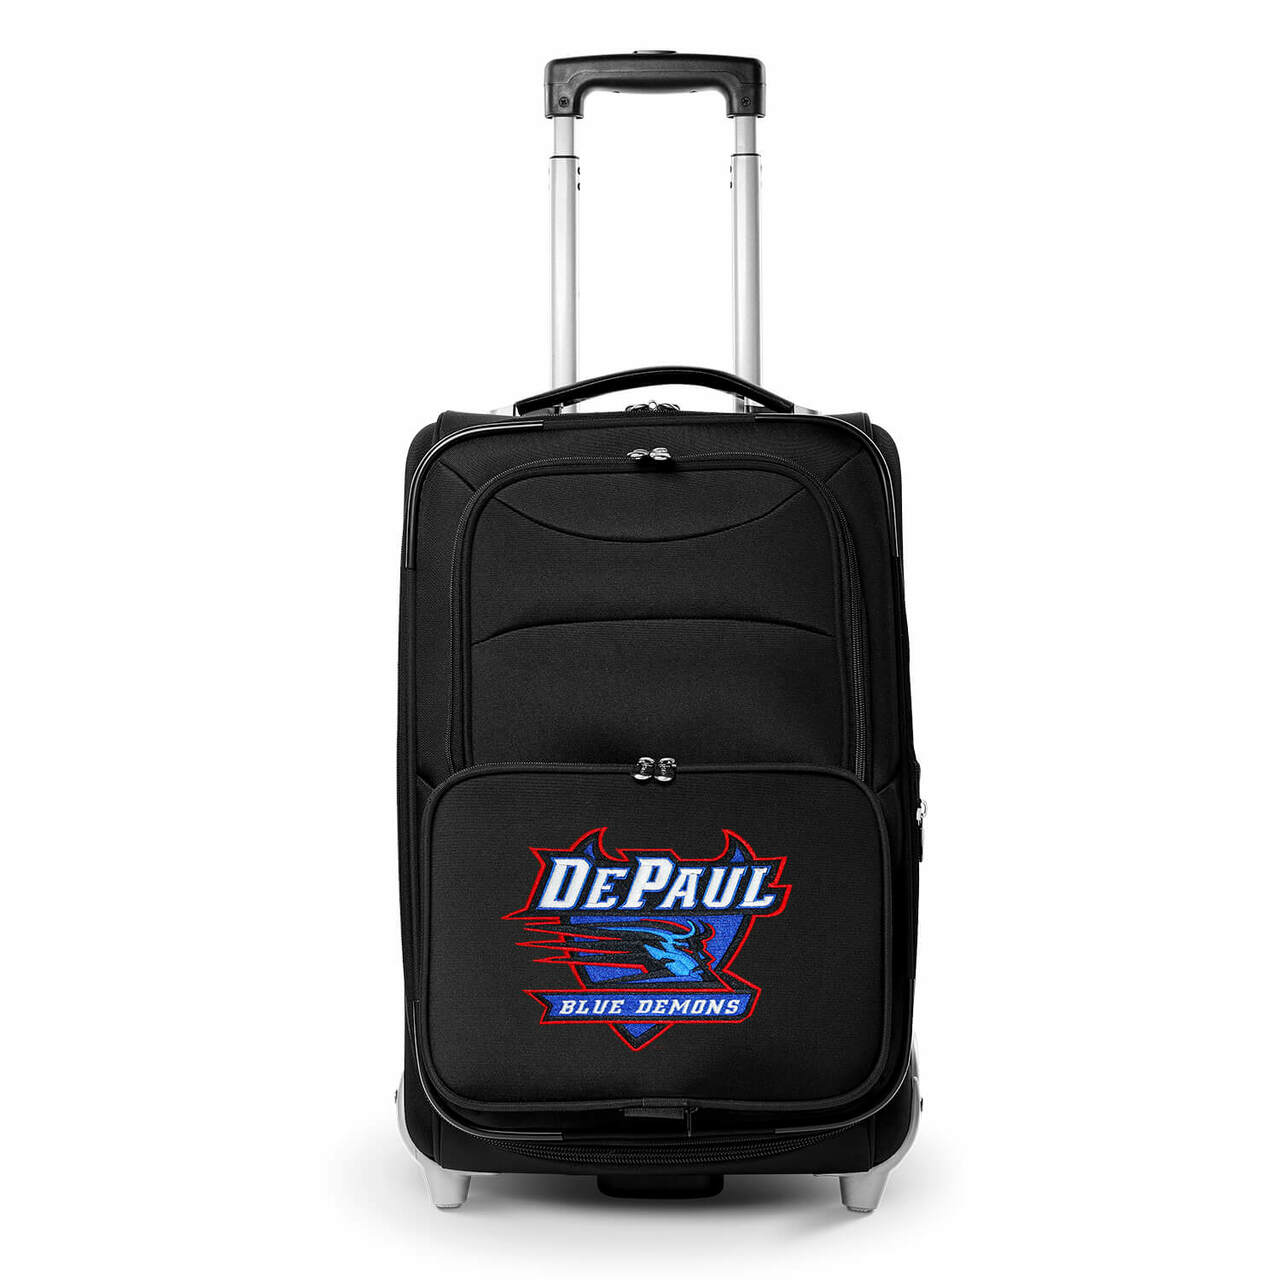 Blue Demons Carry On Luggage | Depaul Blue Demons Rolling Carry On Luggage